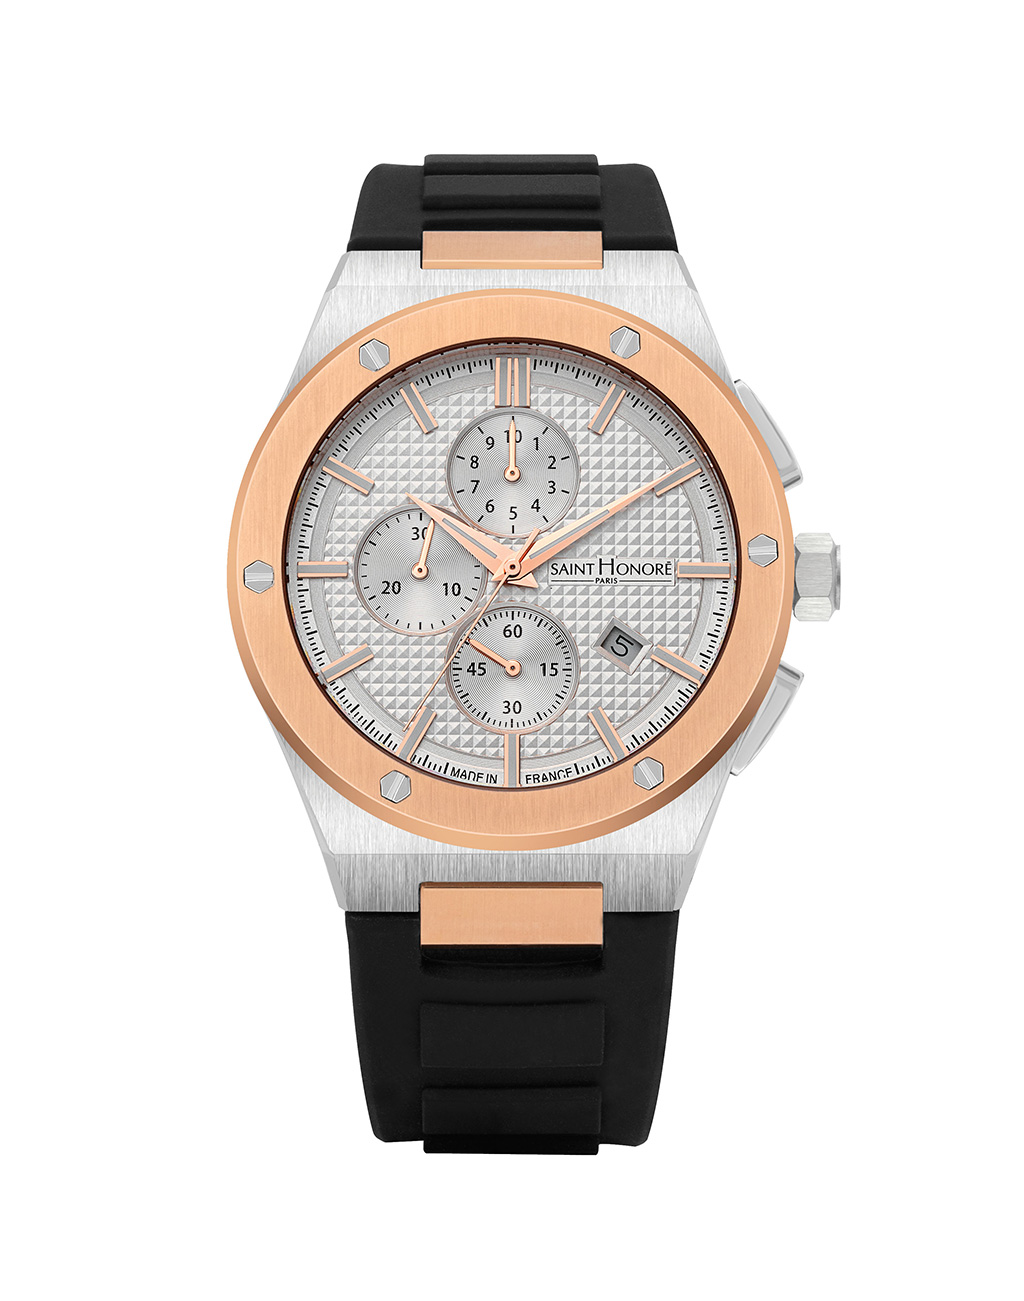 HAUSSMAN II Men's watch - Two-tone ion plating rose gold case, white dial, black silicon strap